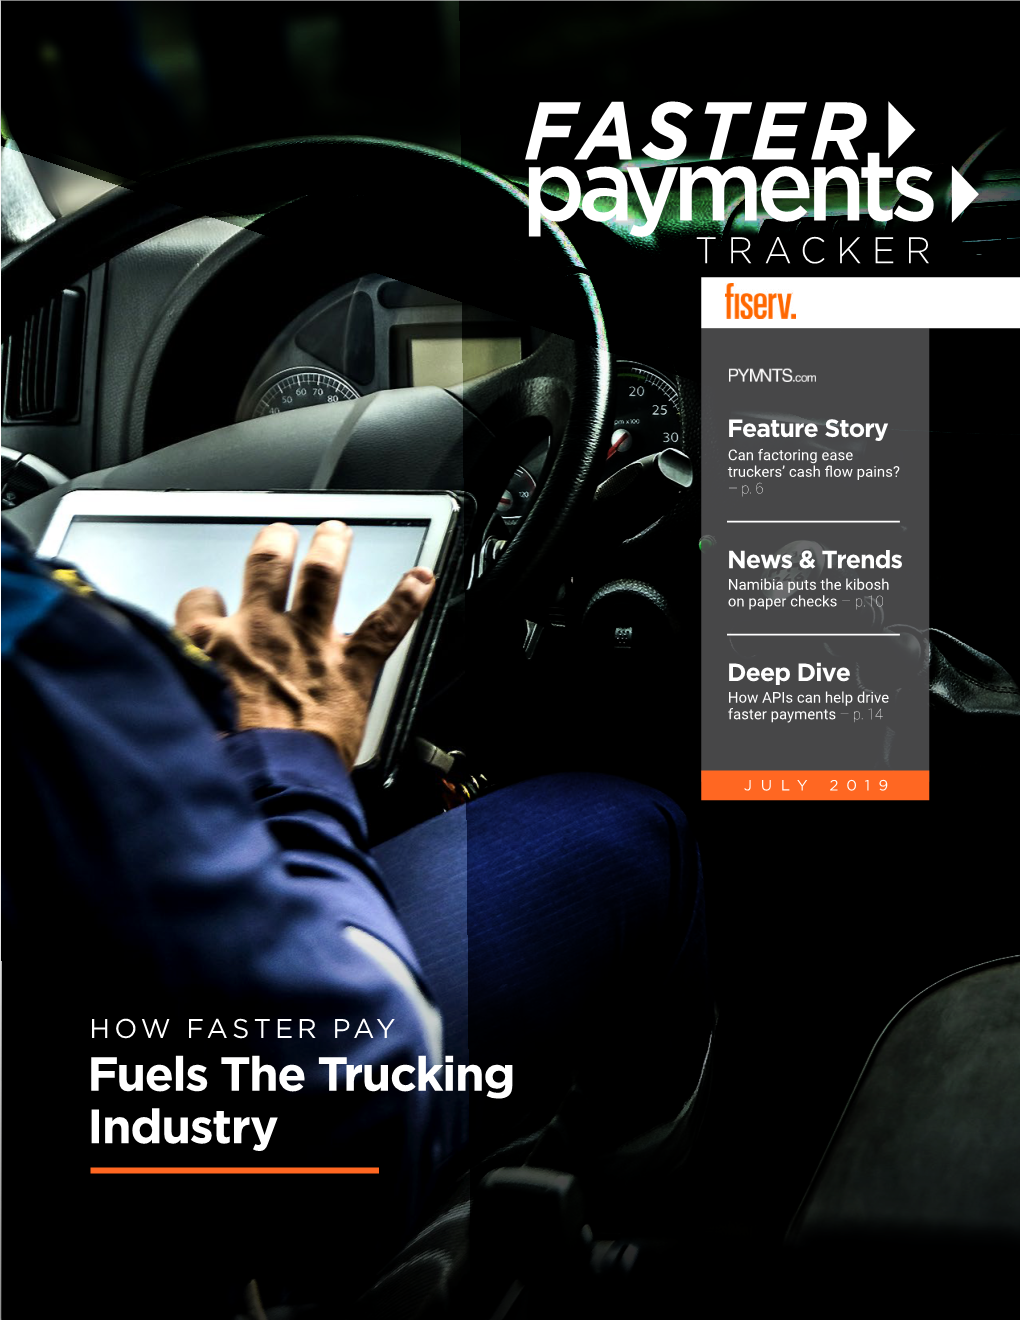 Fuels the Trucking Industry WHAT's INSIDE FEATURE STORY NEWS & TRENDS